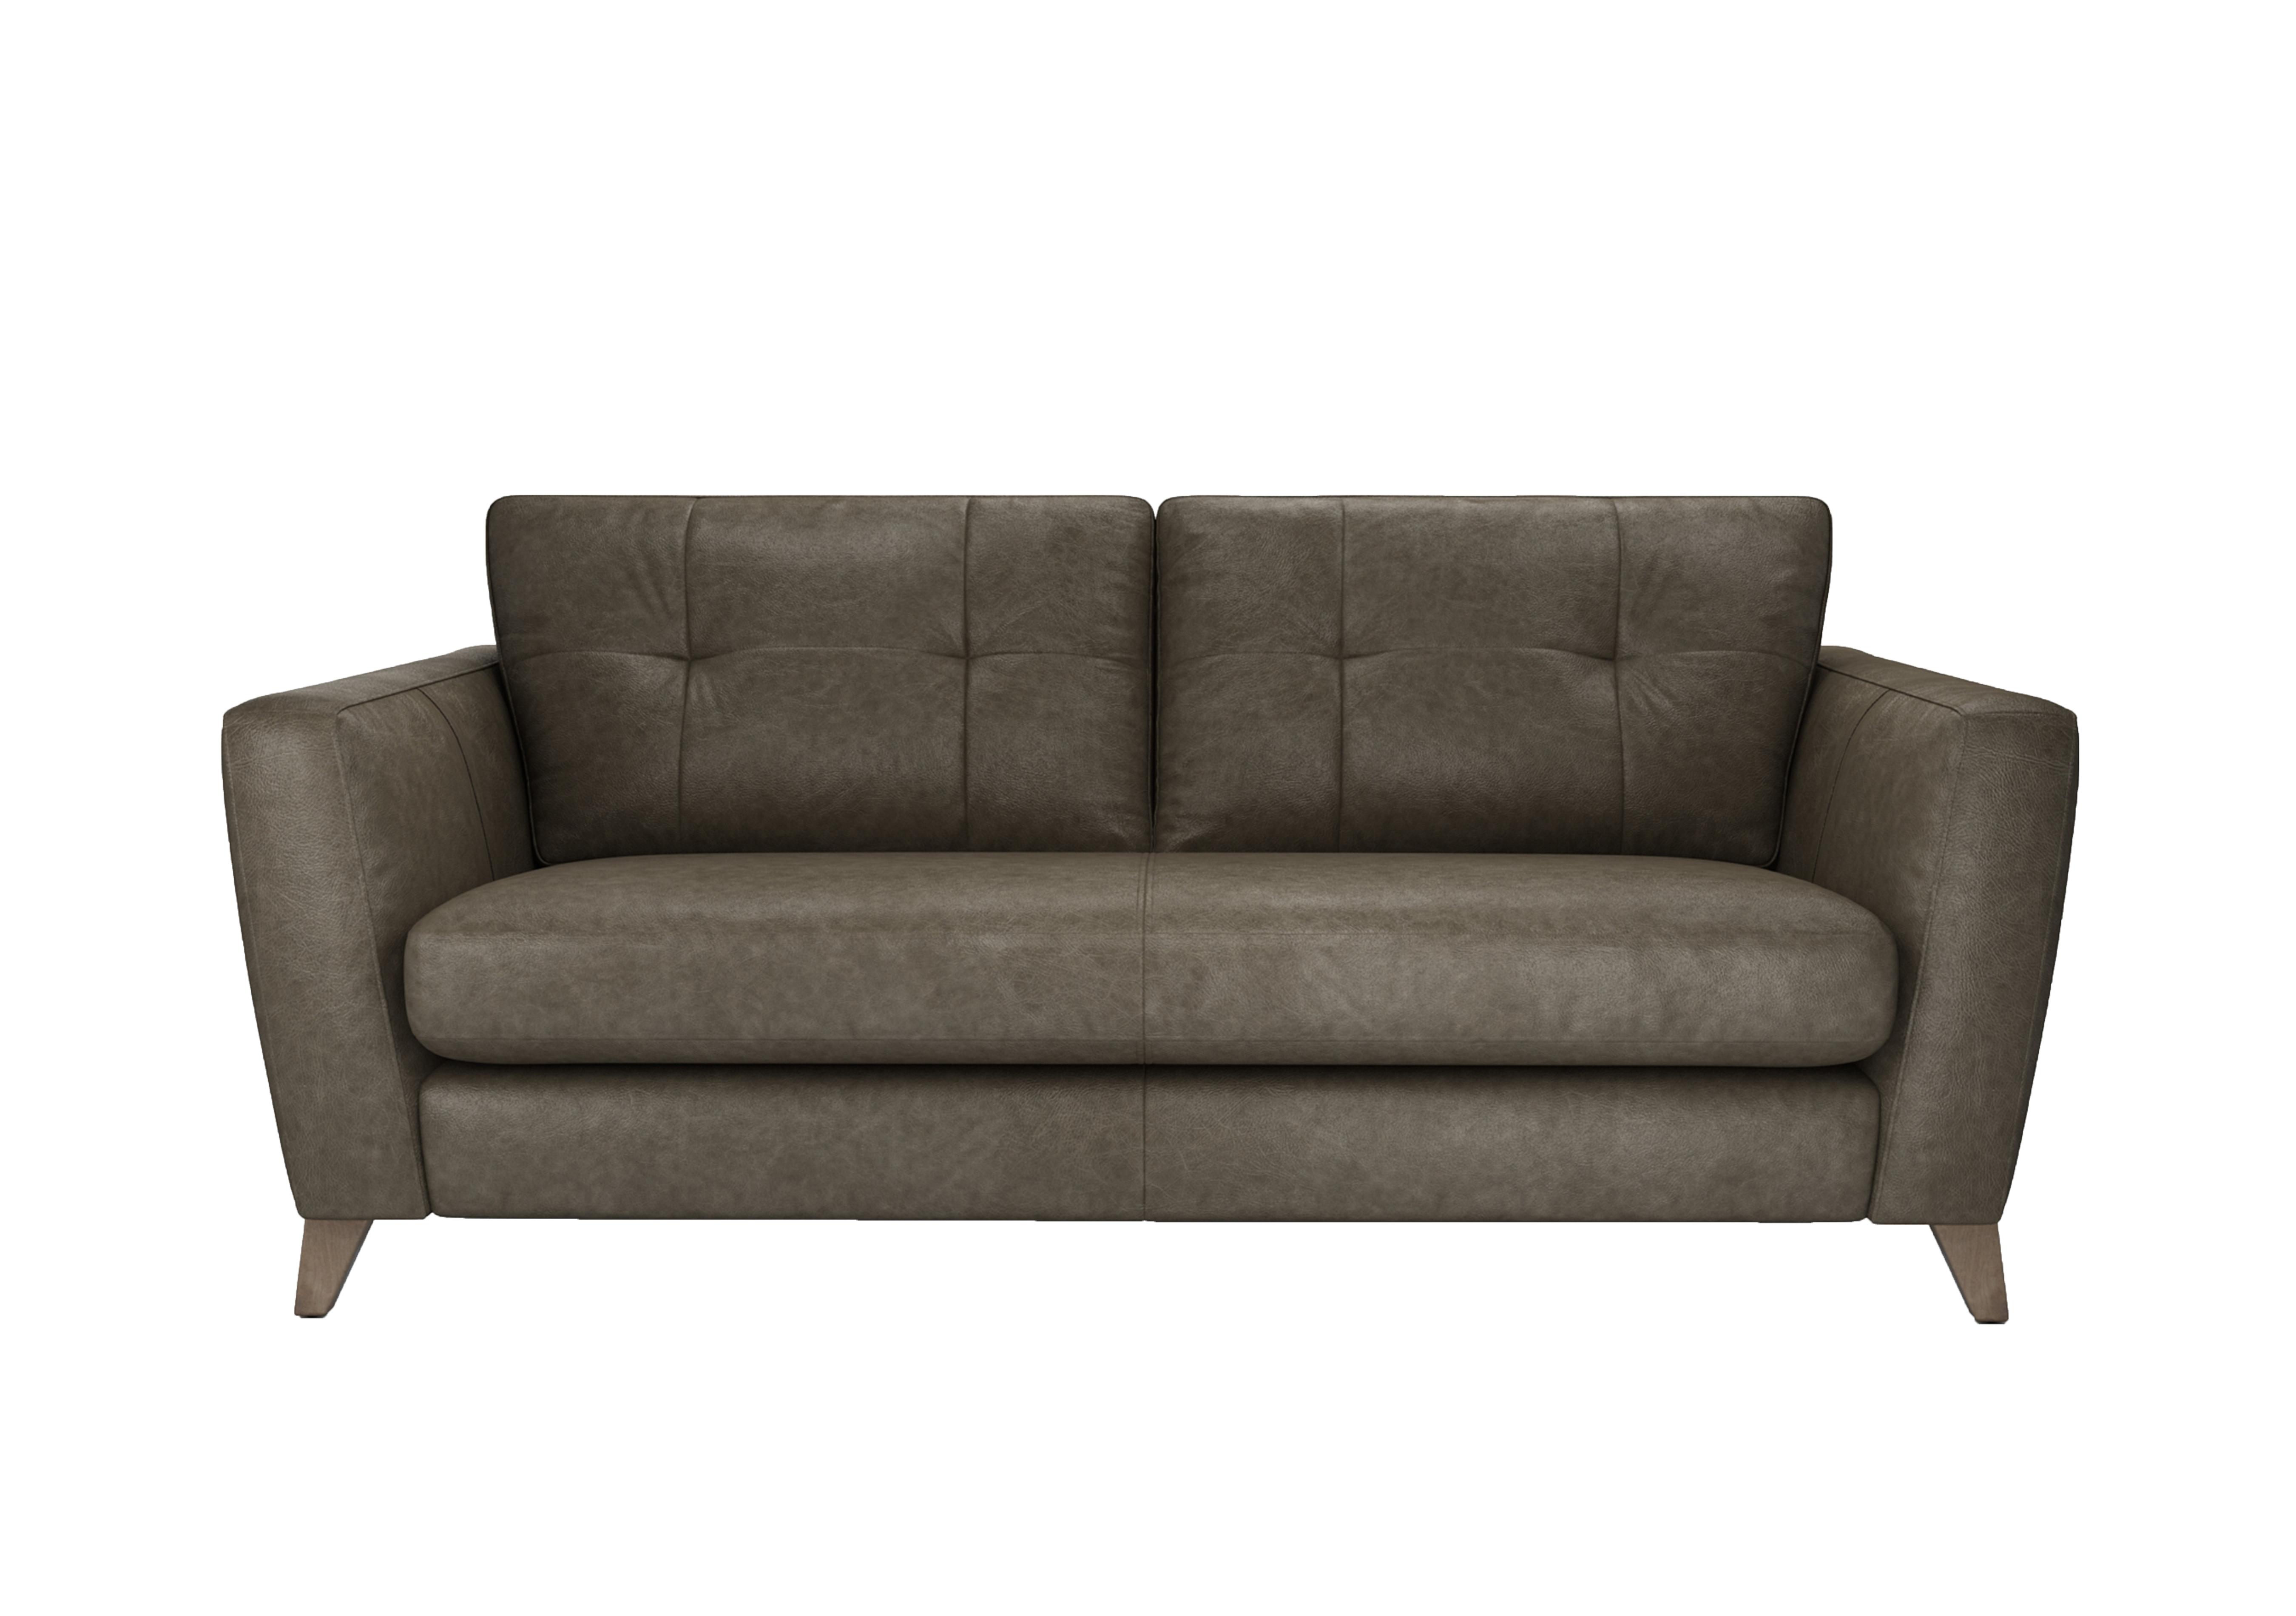 Hermione 3 Seater Leather Sofa in Gra189 Granite Wo Ft on Furniture Village